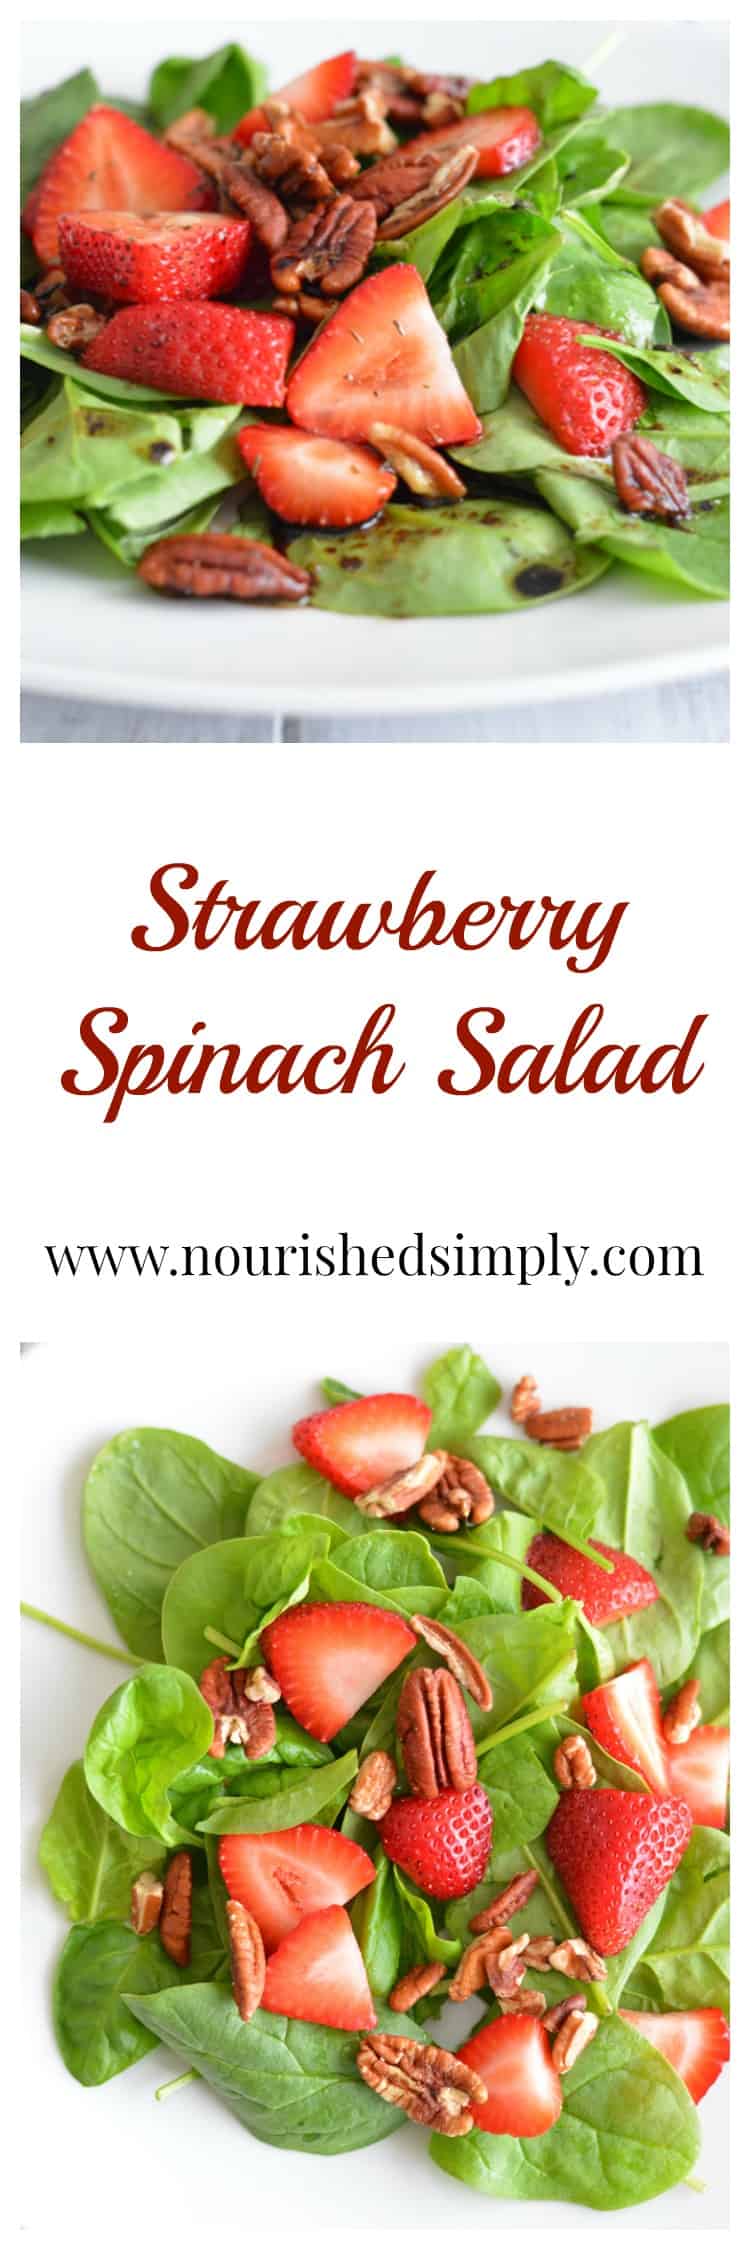 Strawberry Salad is a delicious blend of flavors. Sweet strawberries and savory spinach and balsamic vinegar is the perfect flavor combination.